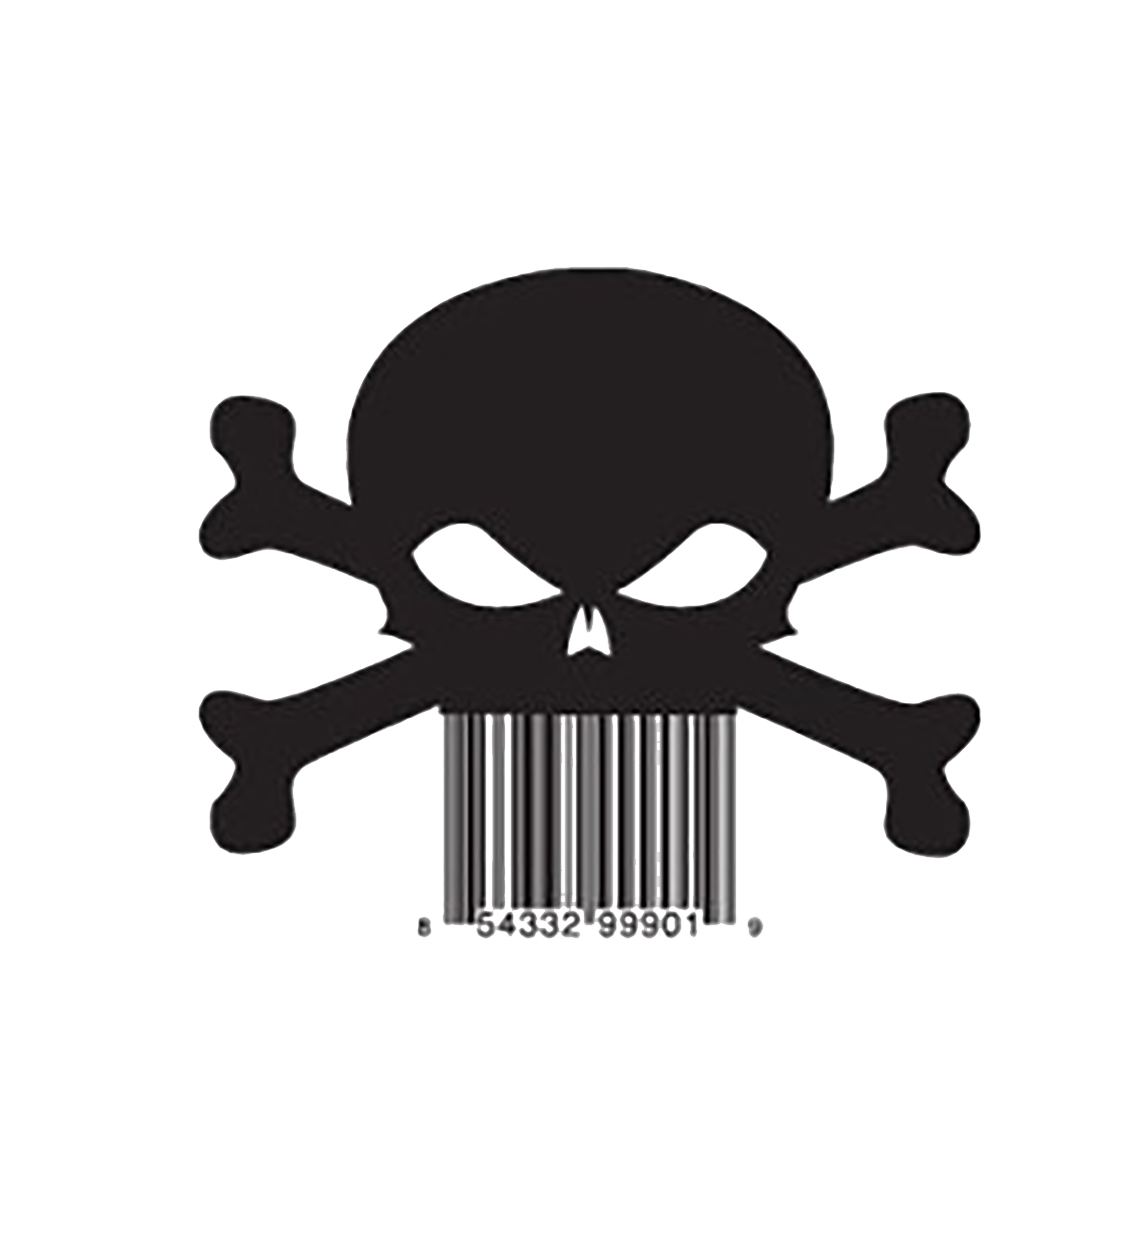 Product Code Two-Dimensional Skull Universal Barcode Qr PNG Image